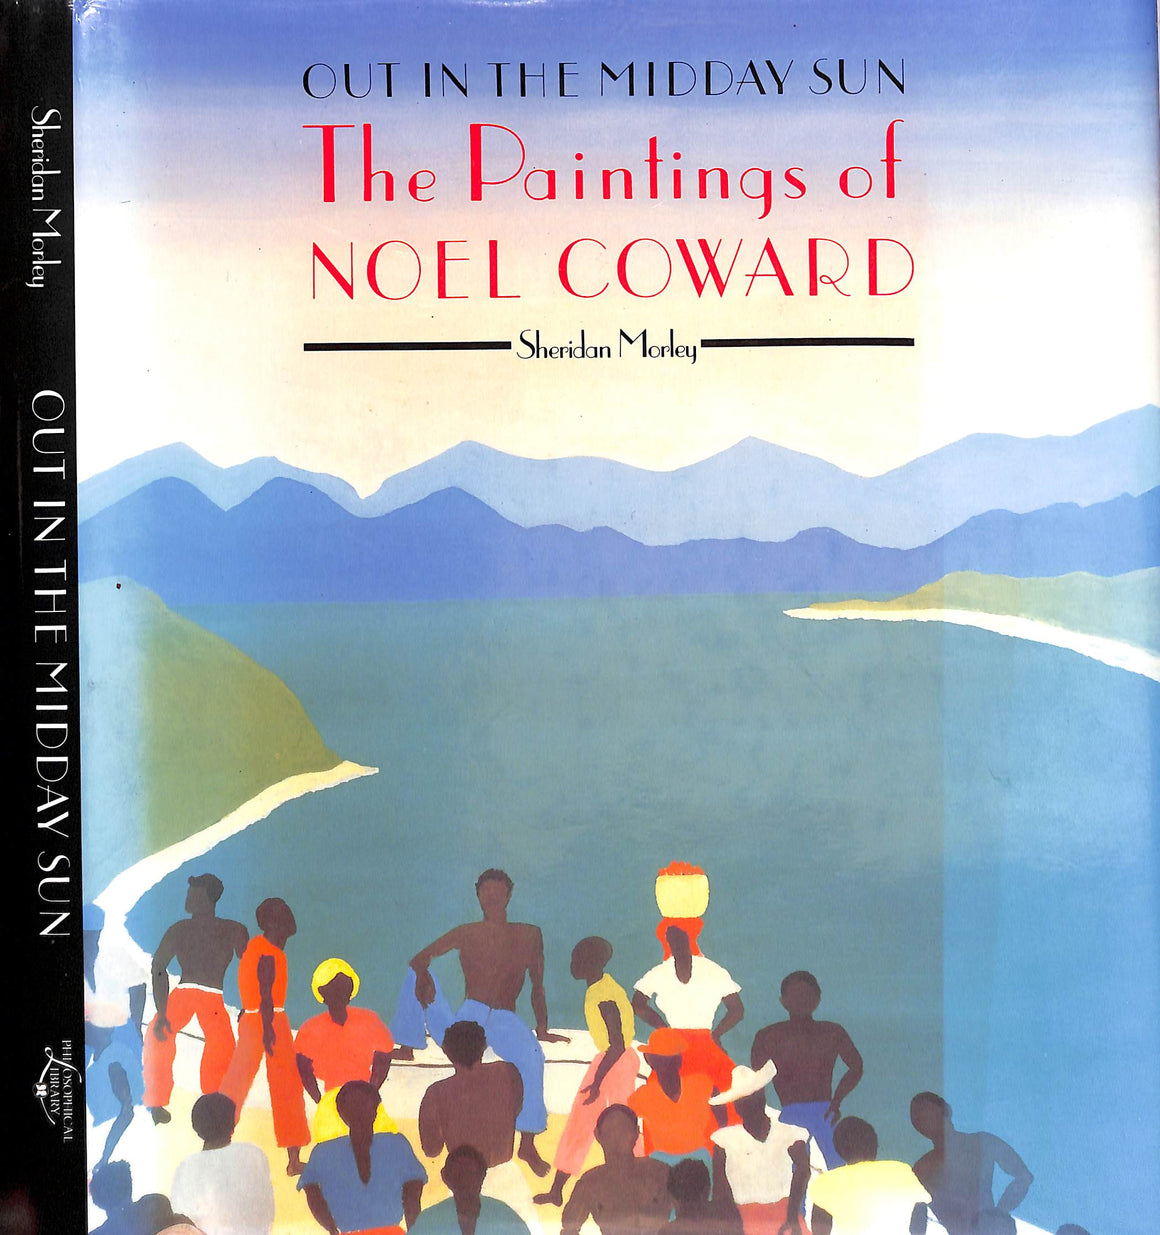 "Out In The Midday Sun The Paintings Of Noel Coward" 1988 MORLEY, Sheridan